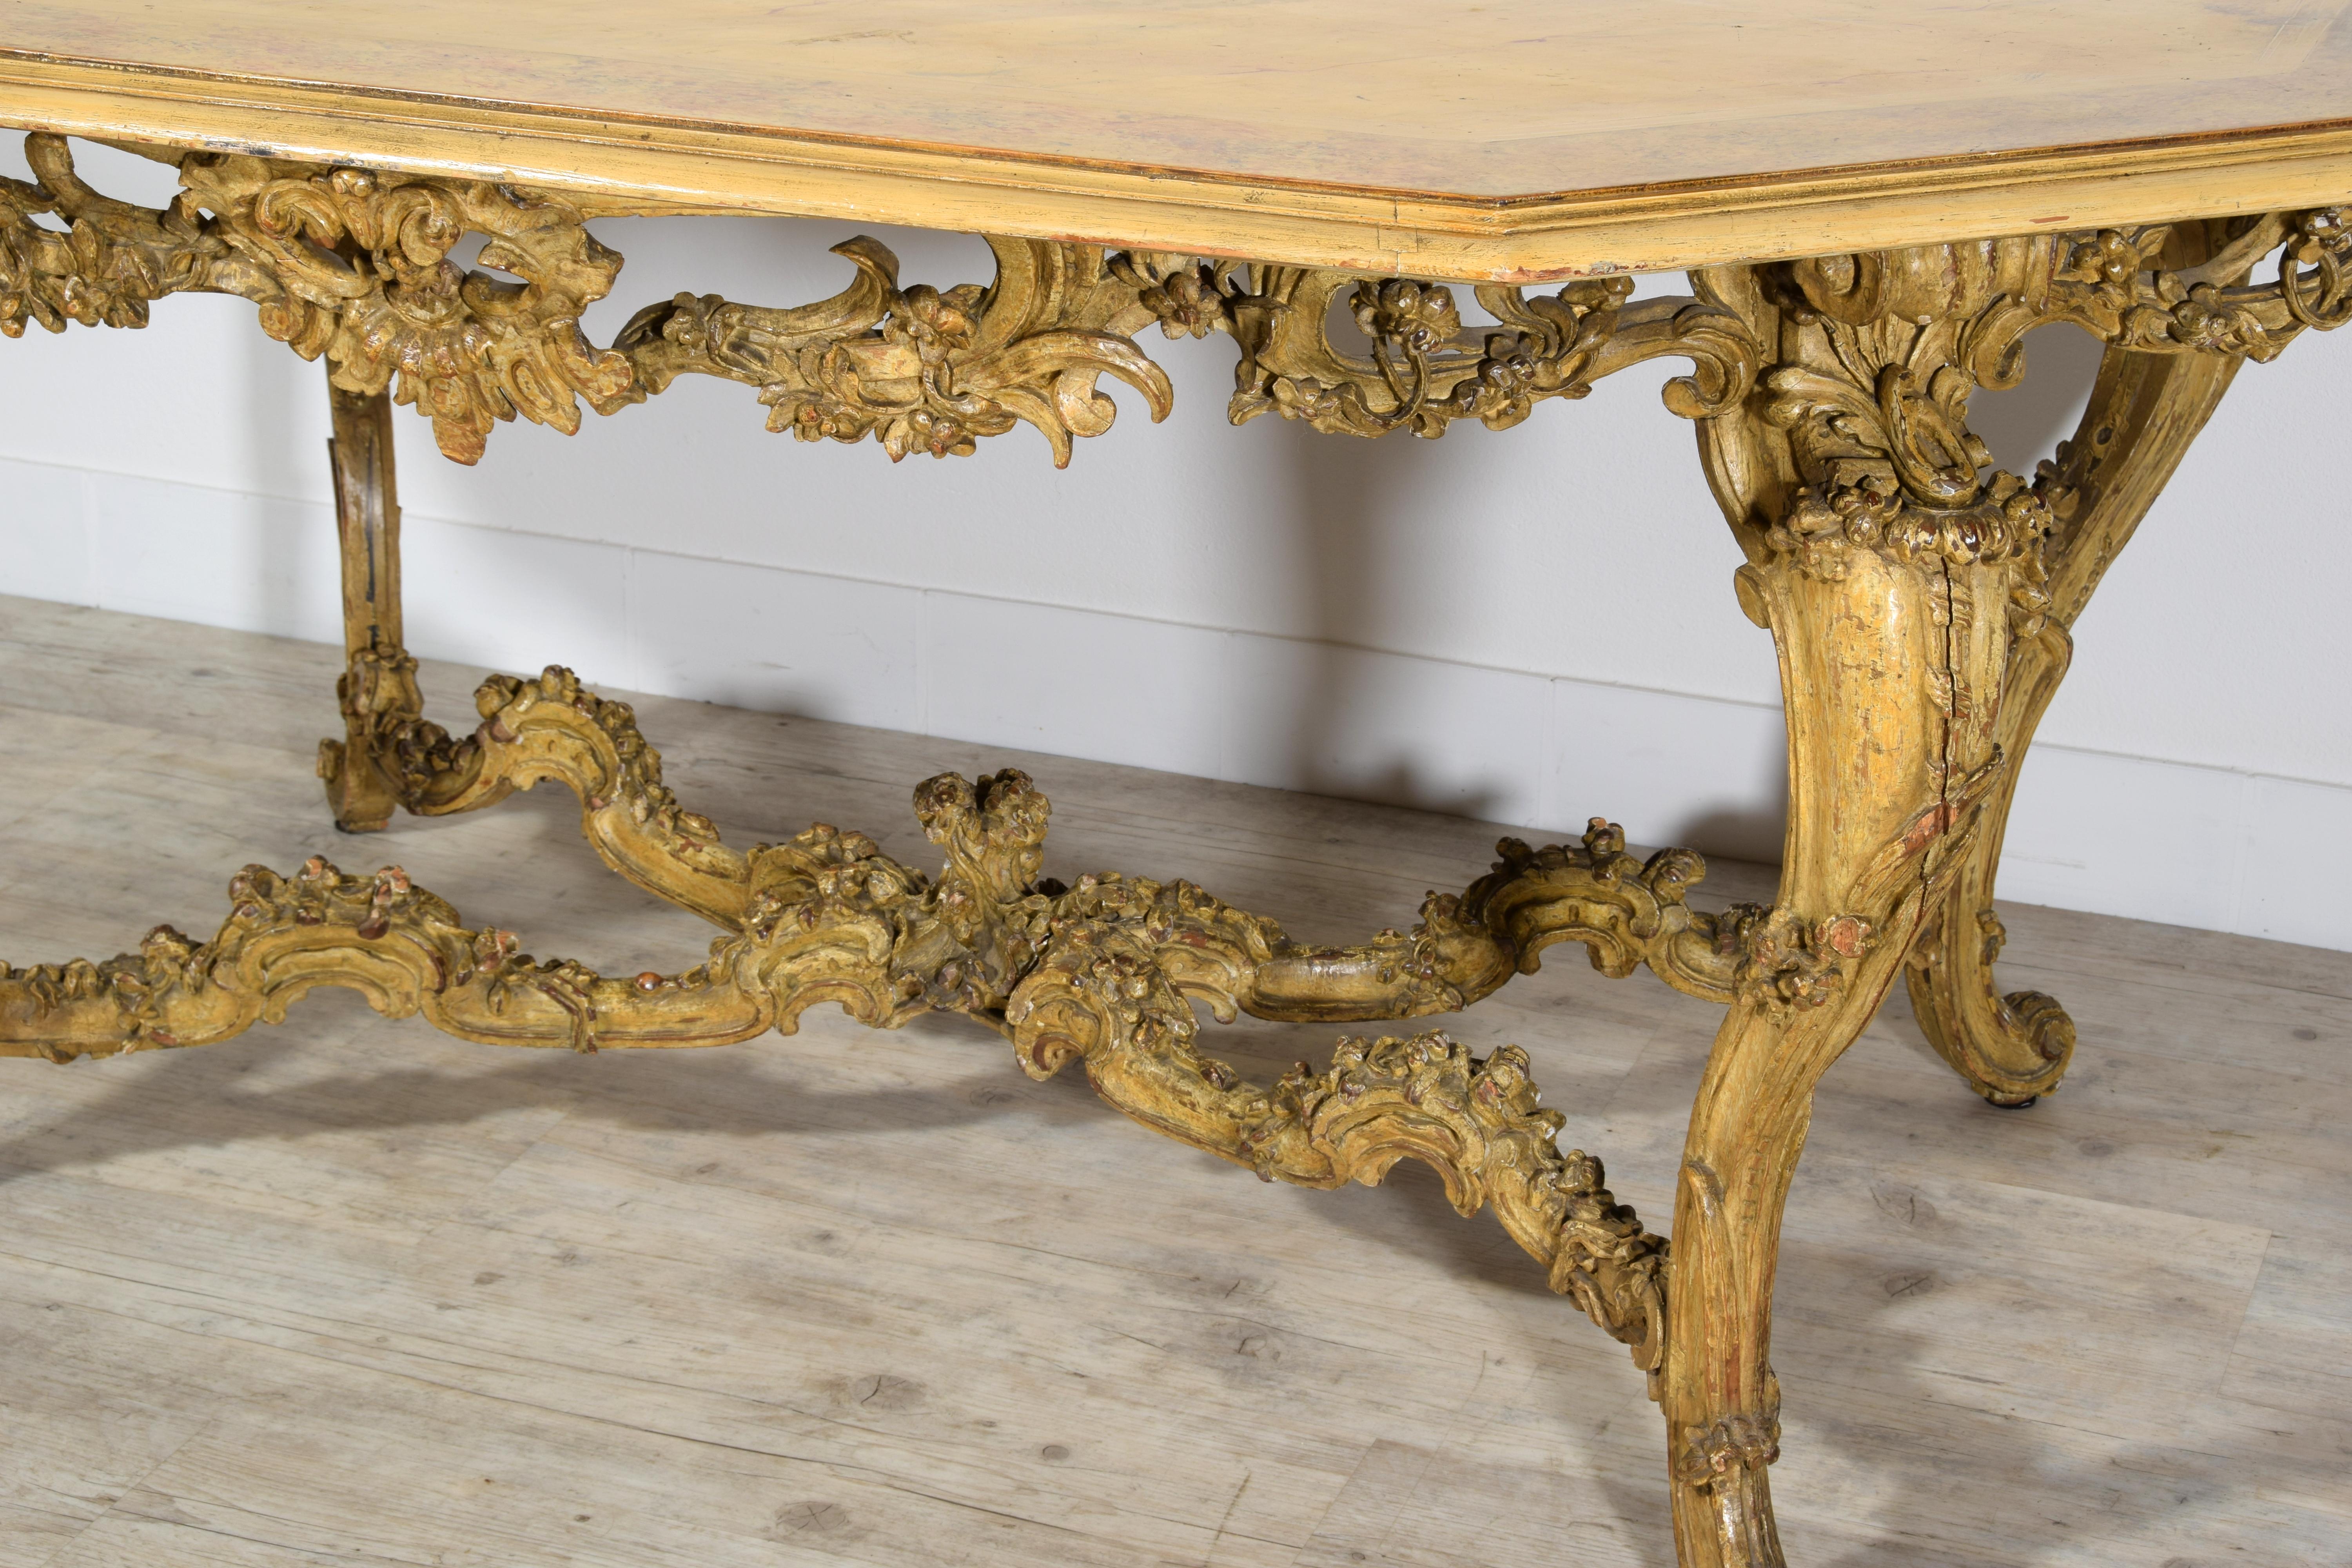 Italian Baroque Carved Gilt and Lacquered Wood Center Table, 18th Century For Sale 11